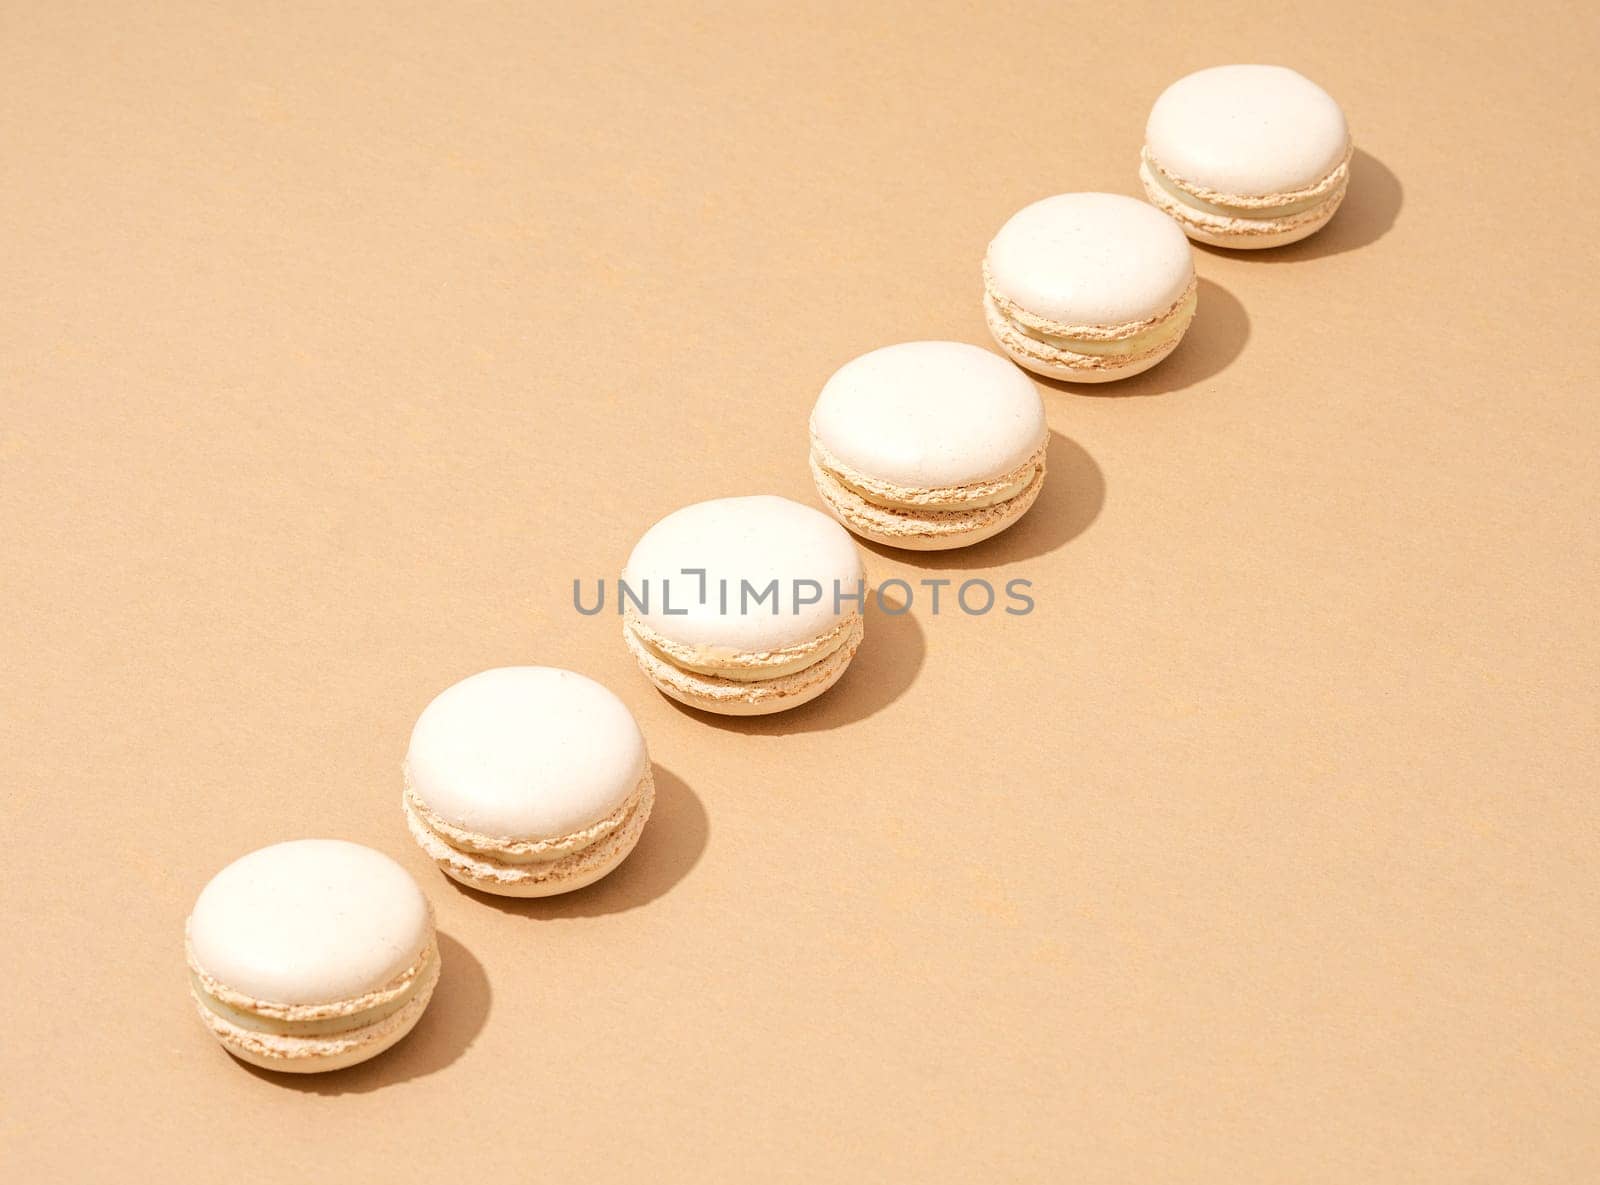 An image of white macaroons on a tan background with plenty of copy space for text or logo overlay